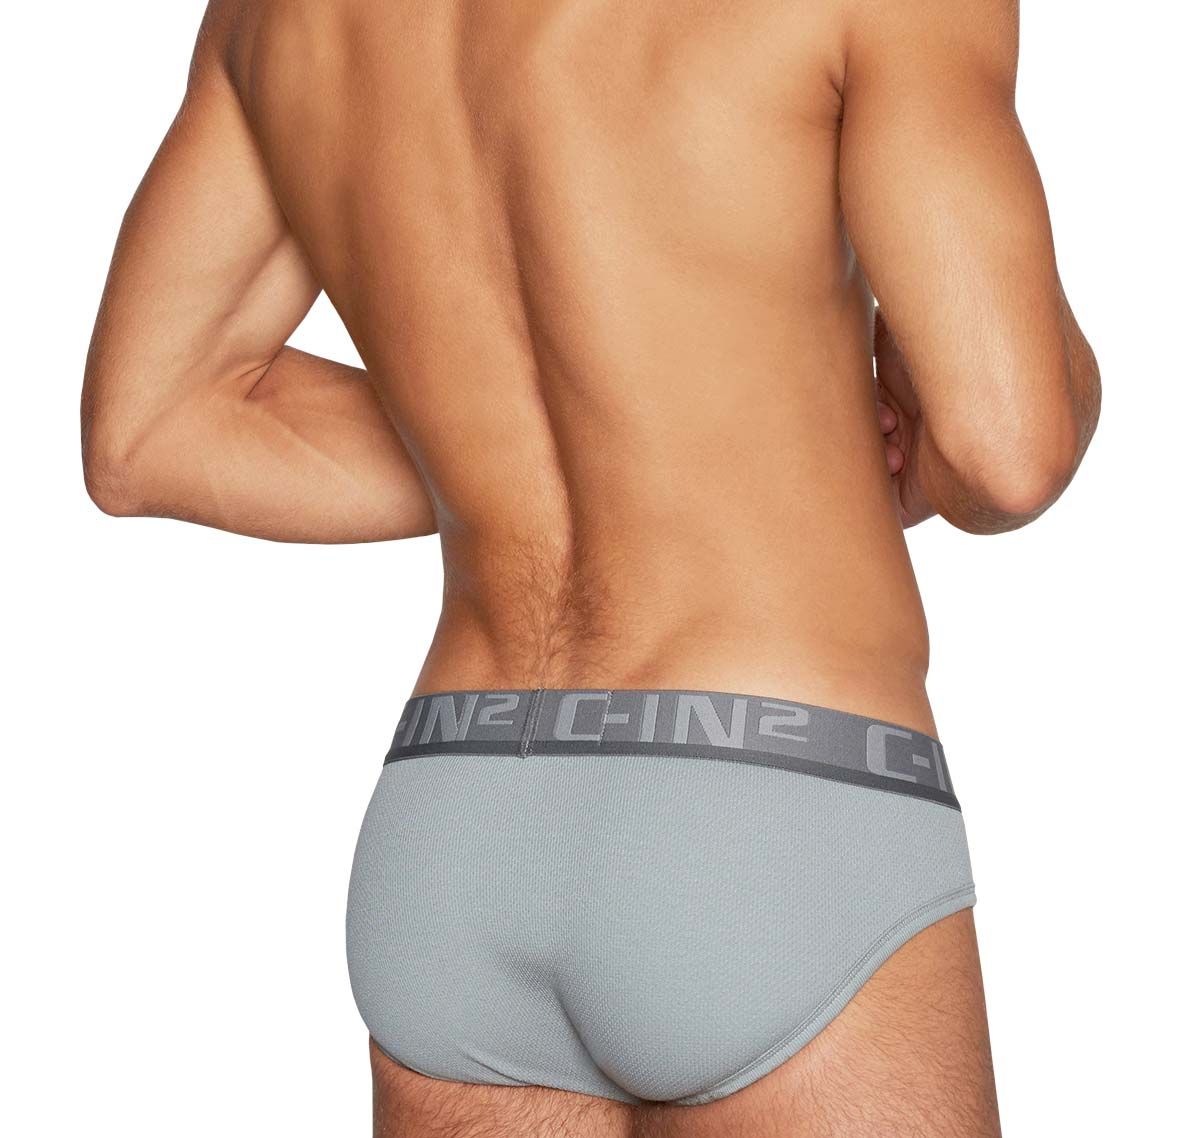 C-IN2 Brief C-Theory LOW RISE BRIEF 8013-057, grey